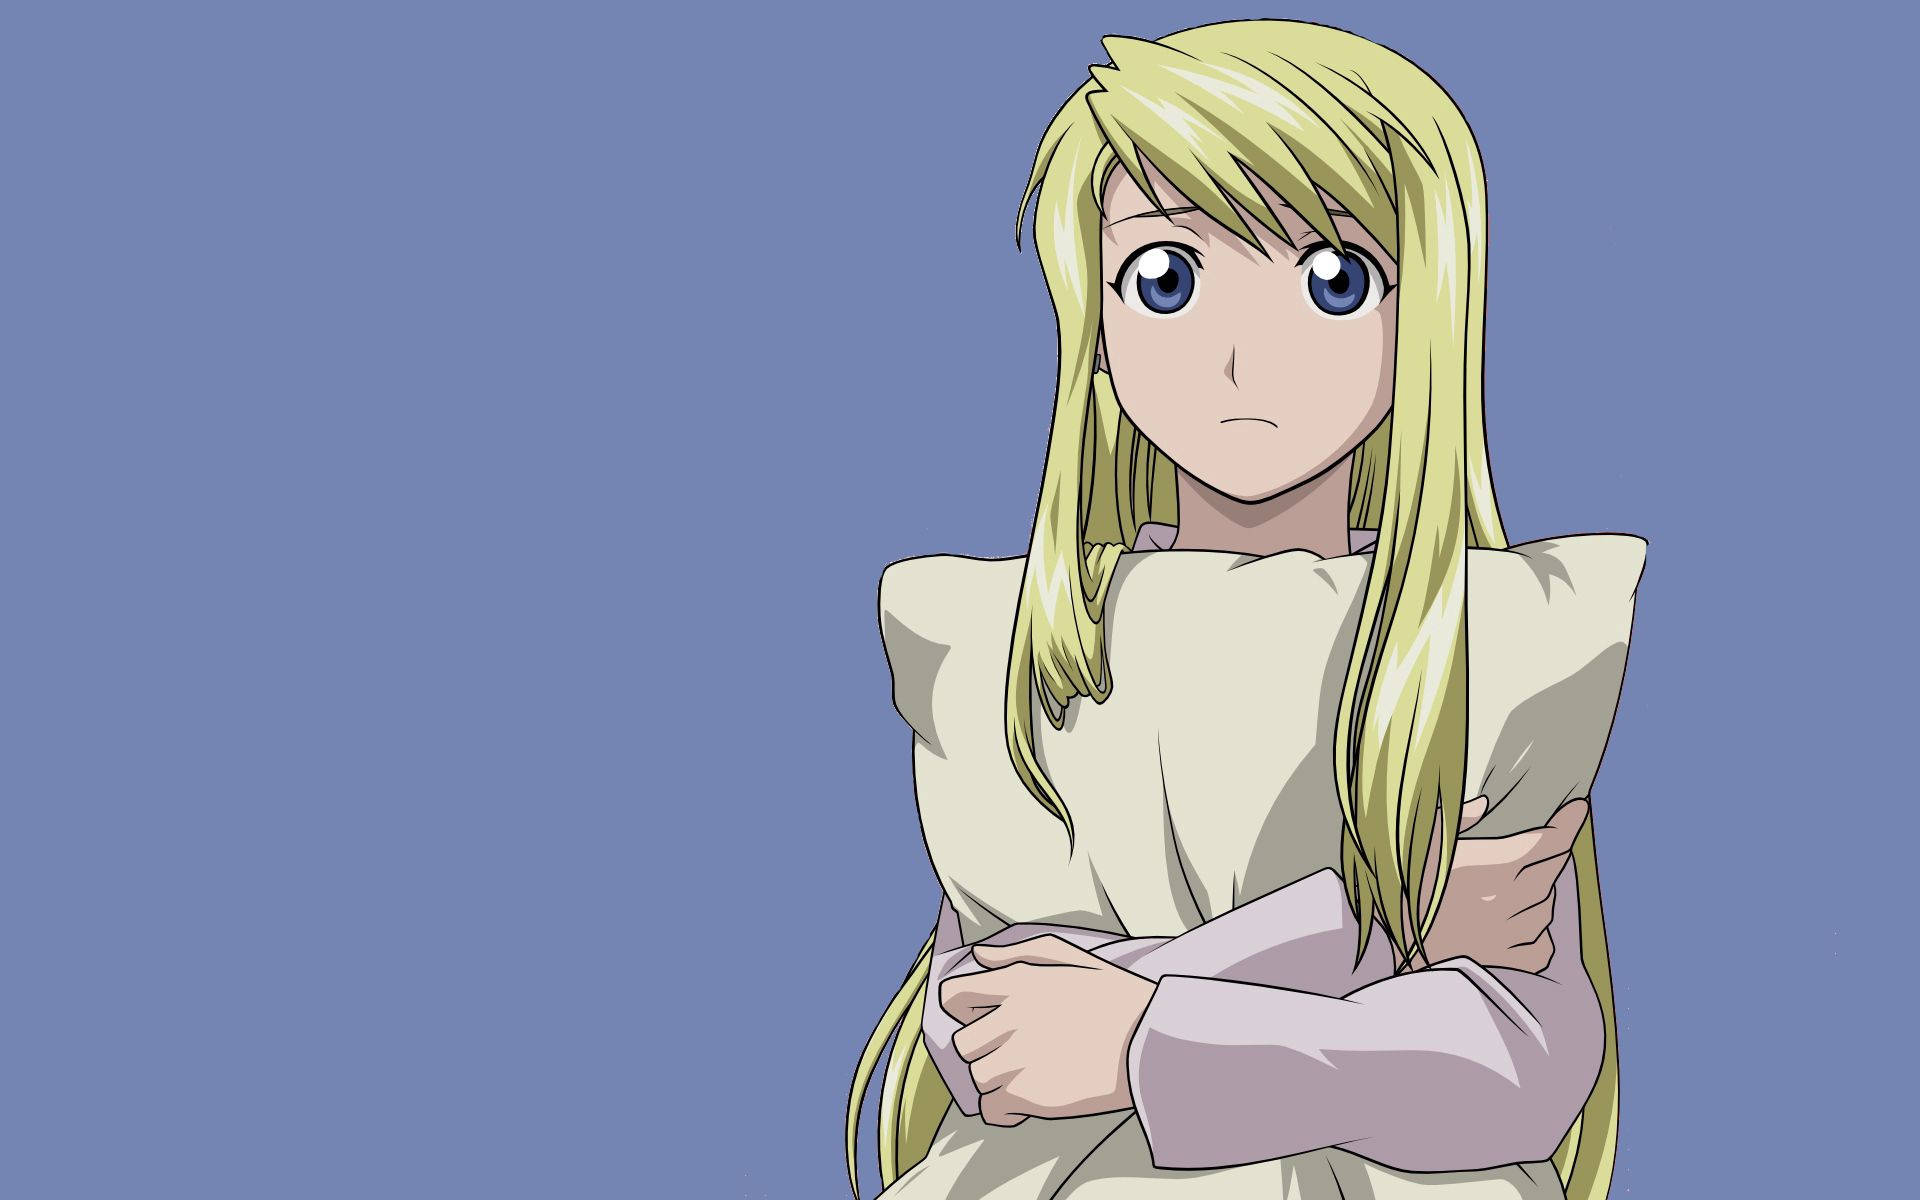 Animated Winry Rockbell from the anime Fullmetal Alchemist holding a pillow, HD wallpaper.